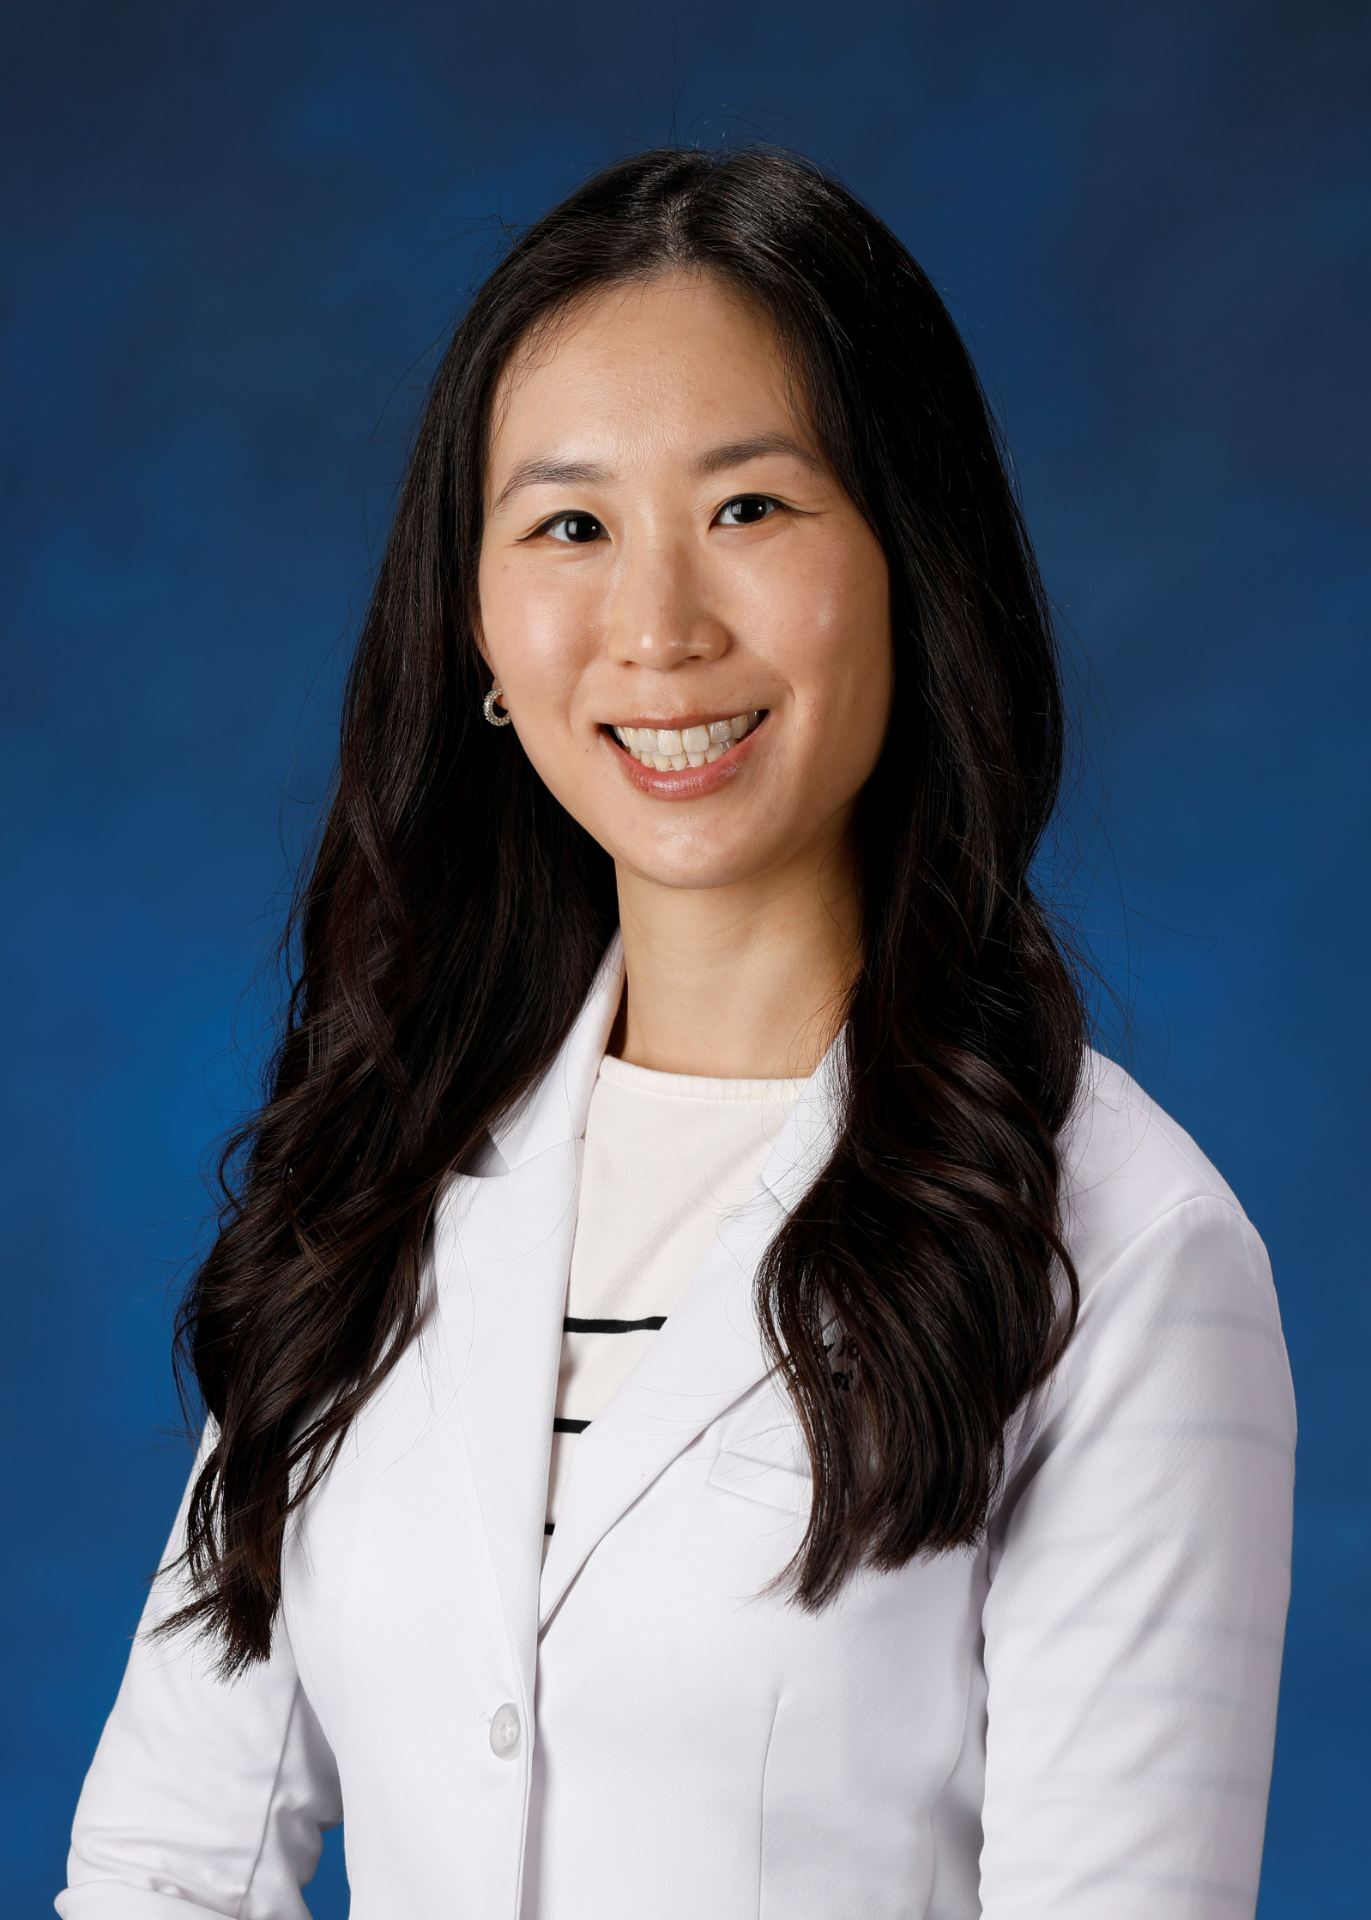 Radiology welcomes new Breast Imaging Faculty, Dr. Jennifer Young